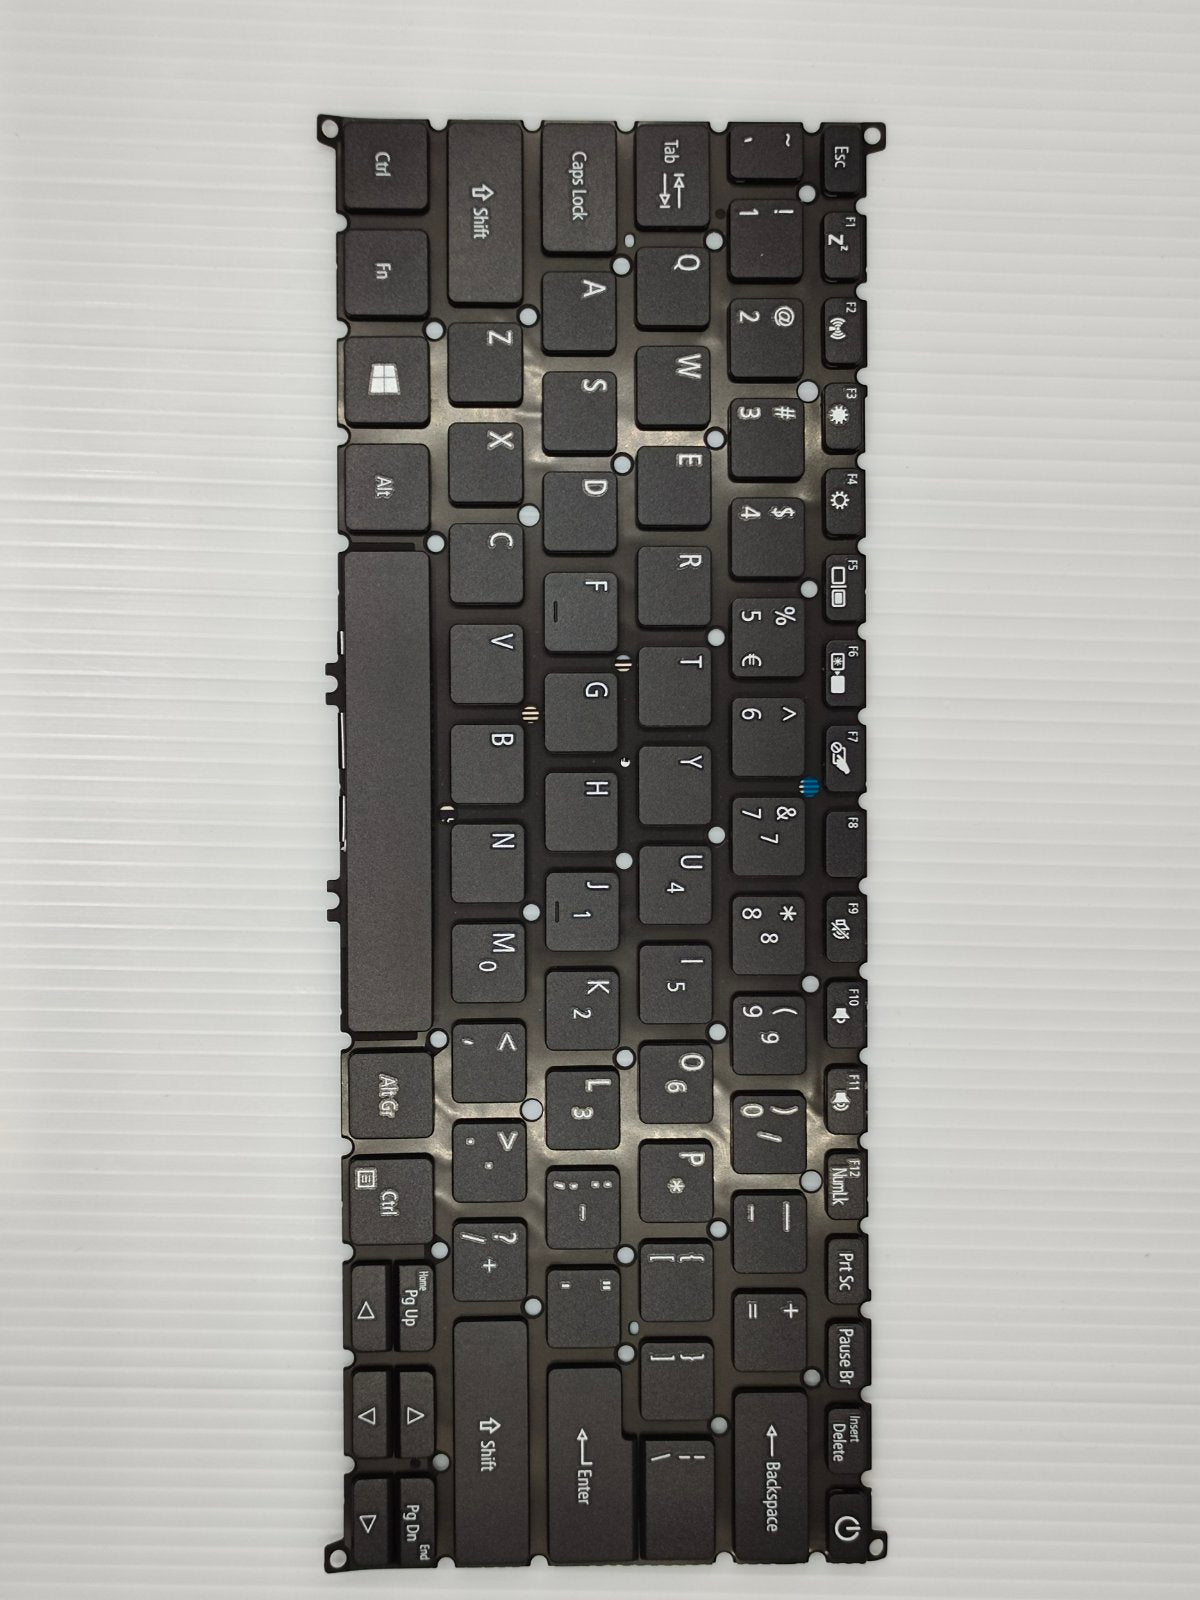 Replacement Keyboard Module for Acer A314-22 WL